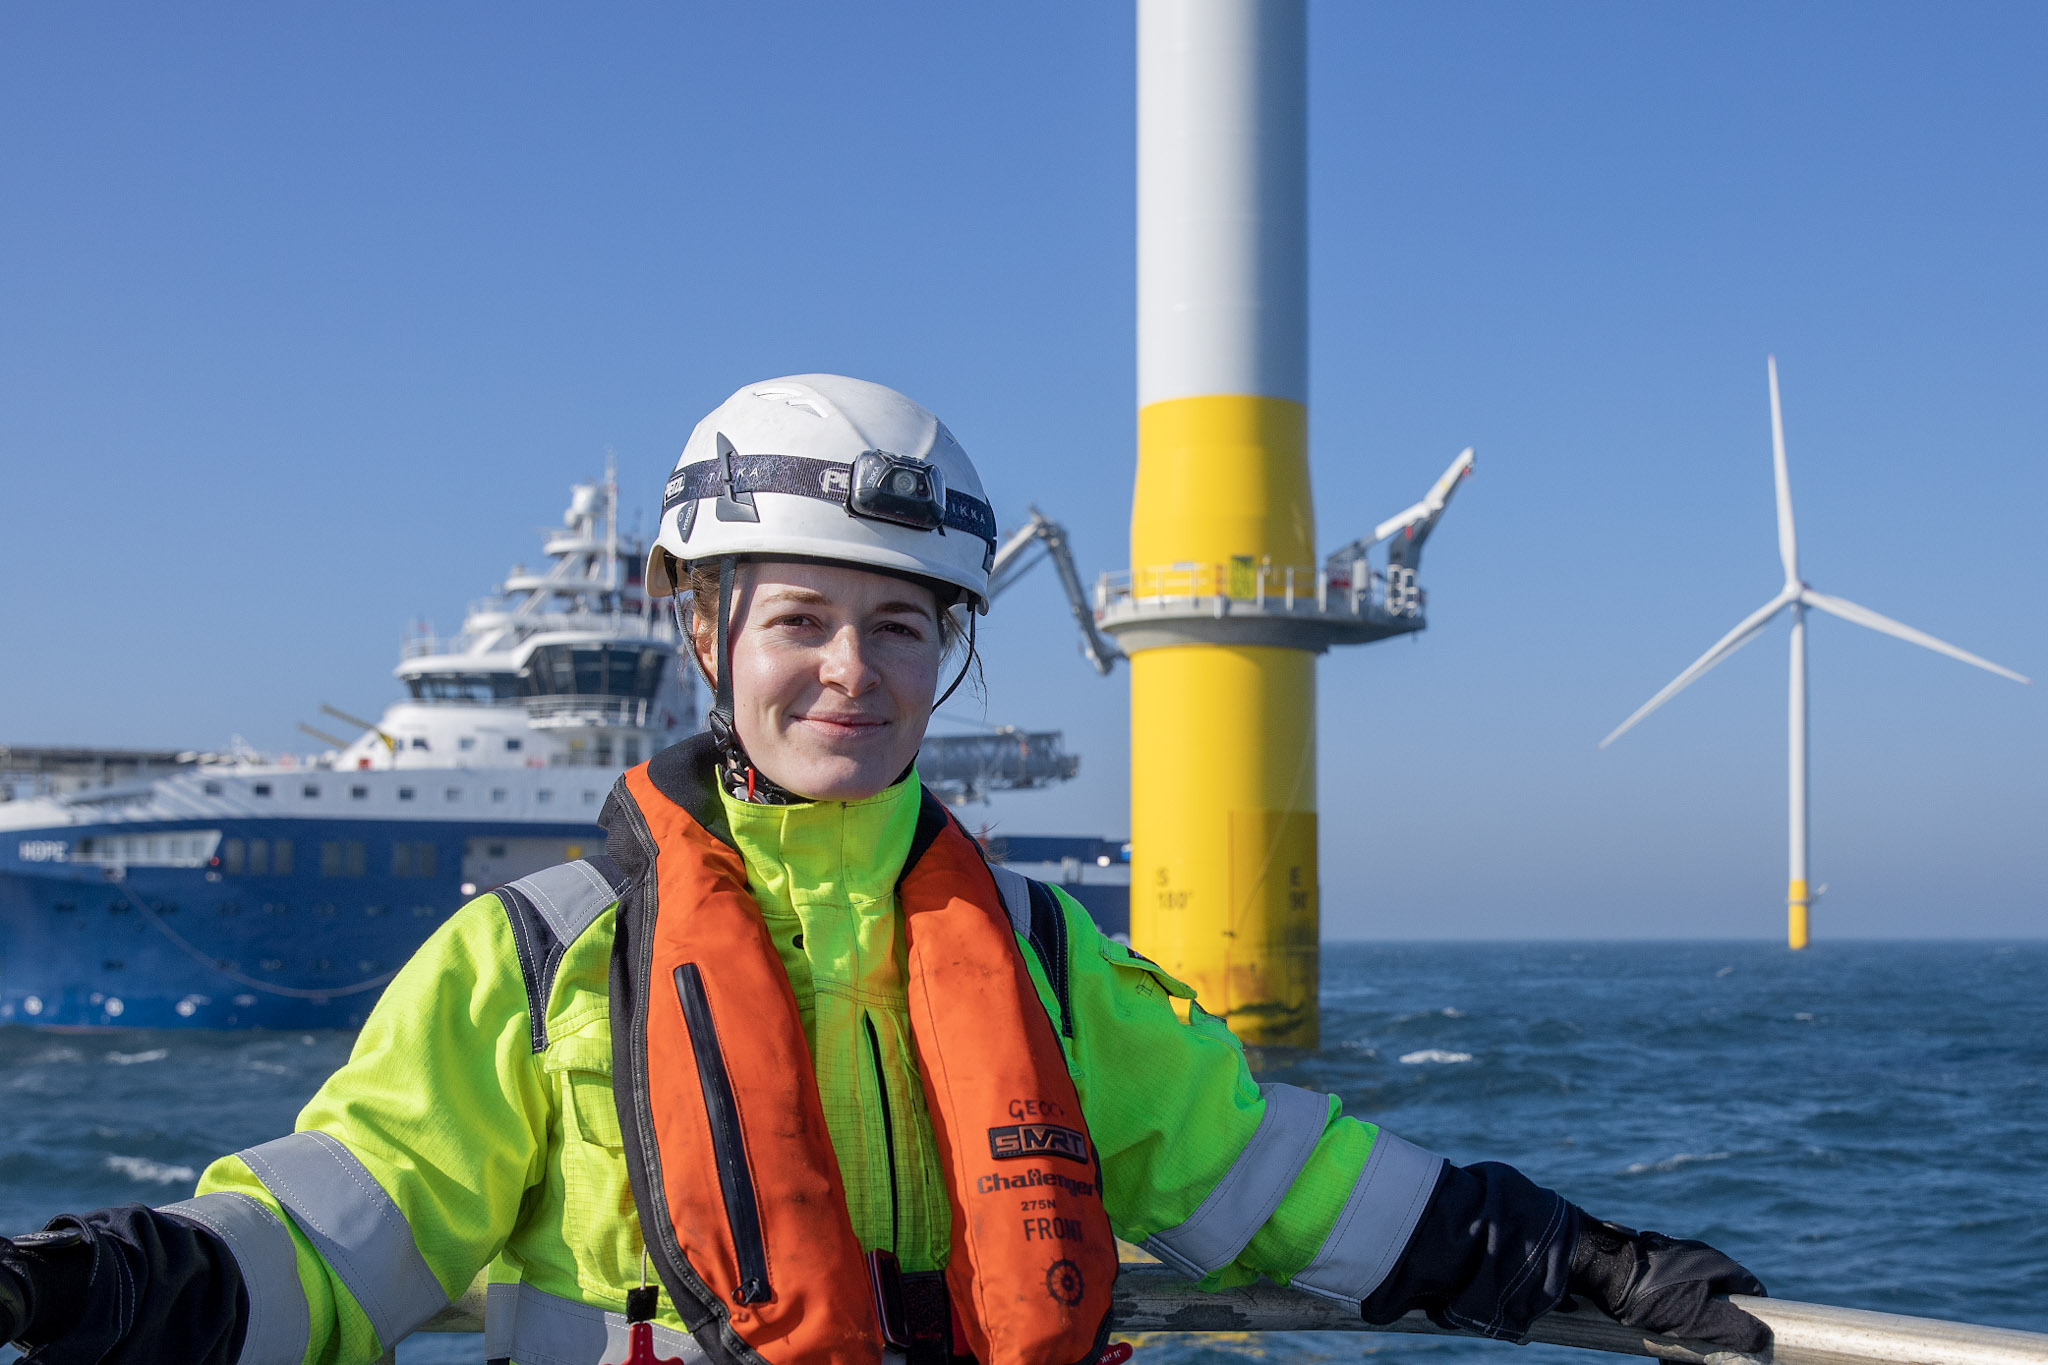 a woman in safety equipment standing on a platform in the middle of the sea in front of a ship and two wind turbines, Hornsea wind farm